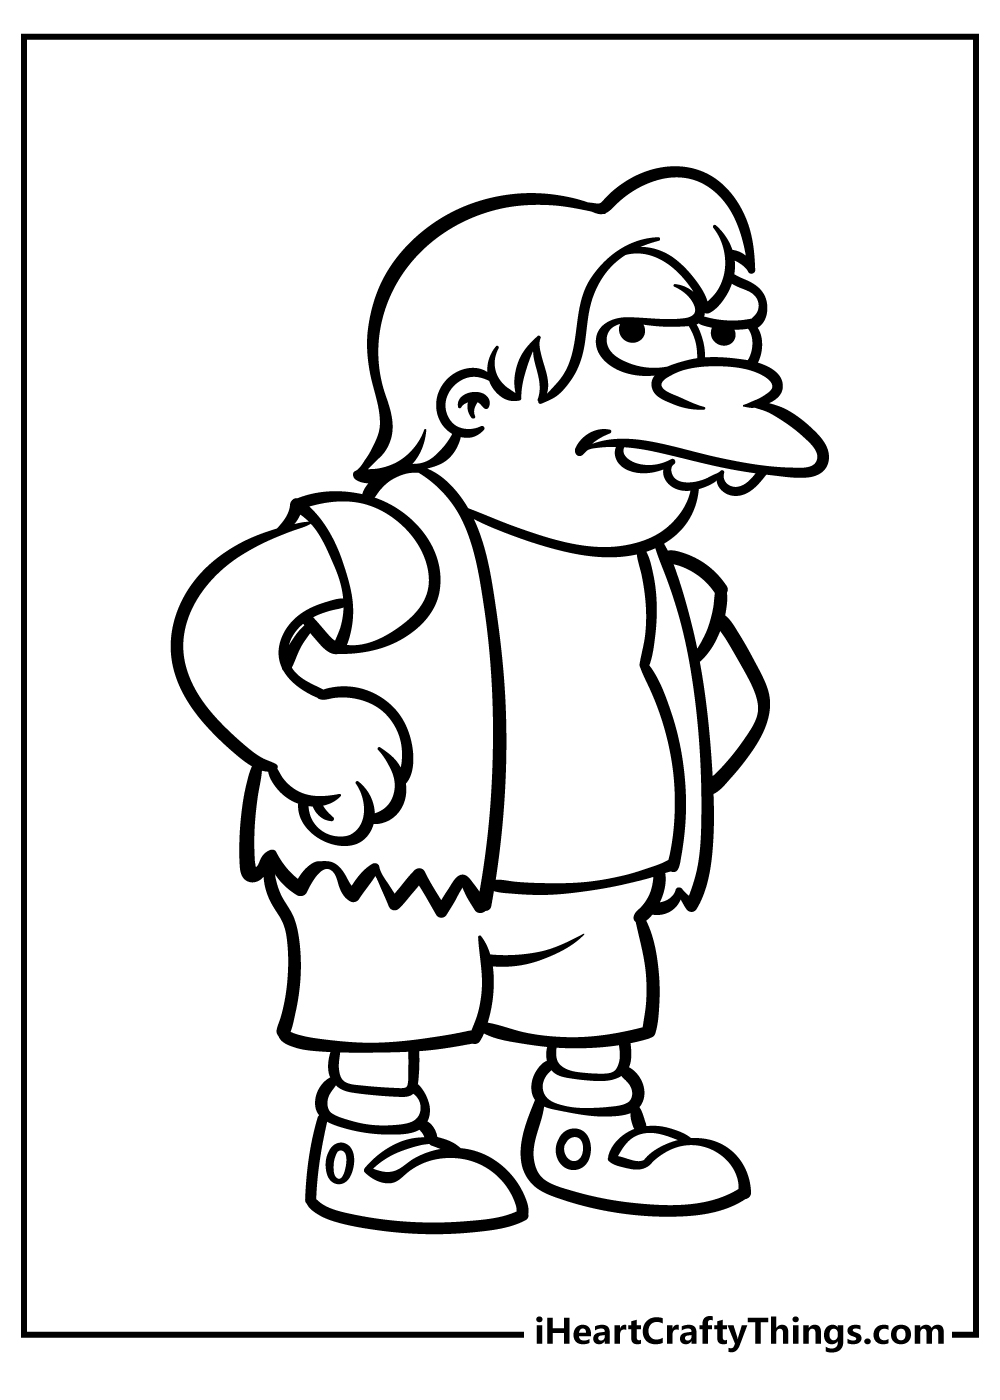 Simpsons Coloring Pages for preschoolers free printable